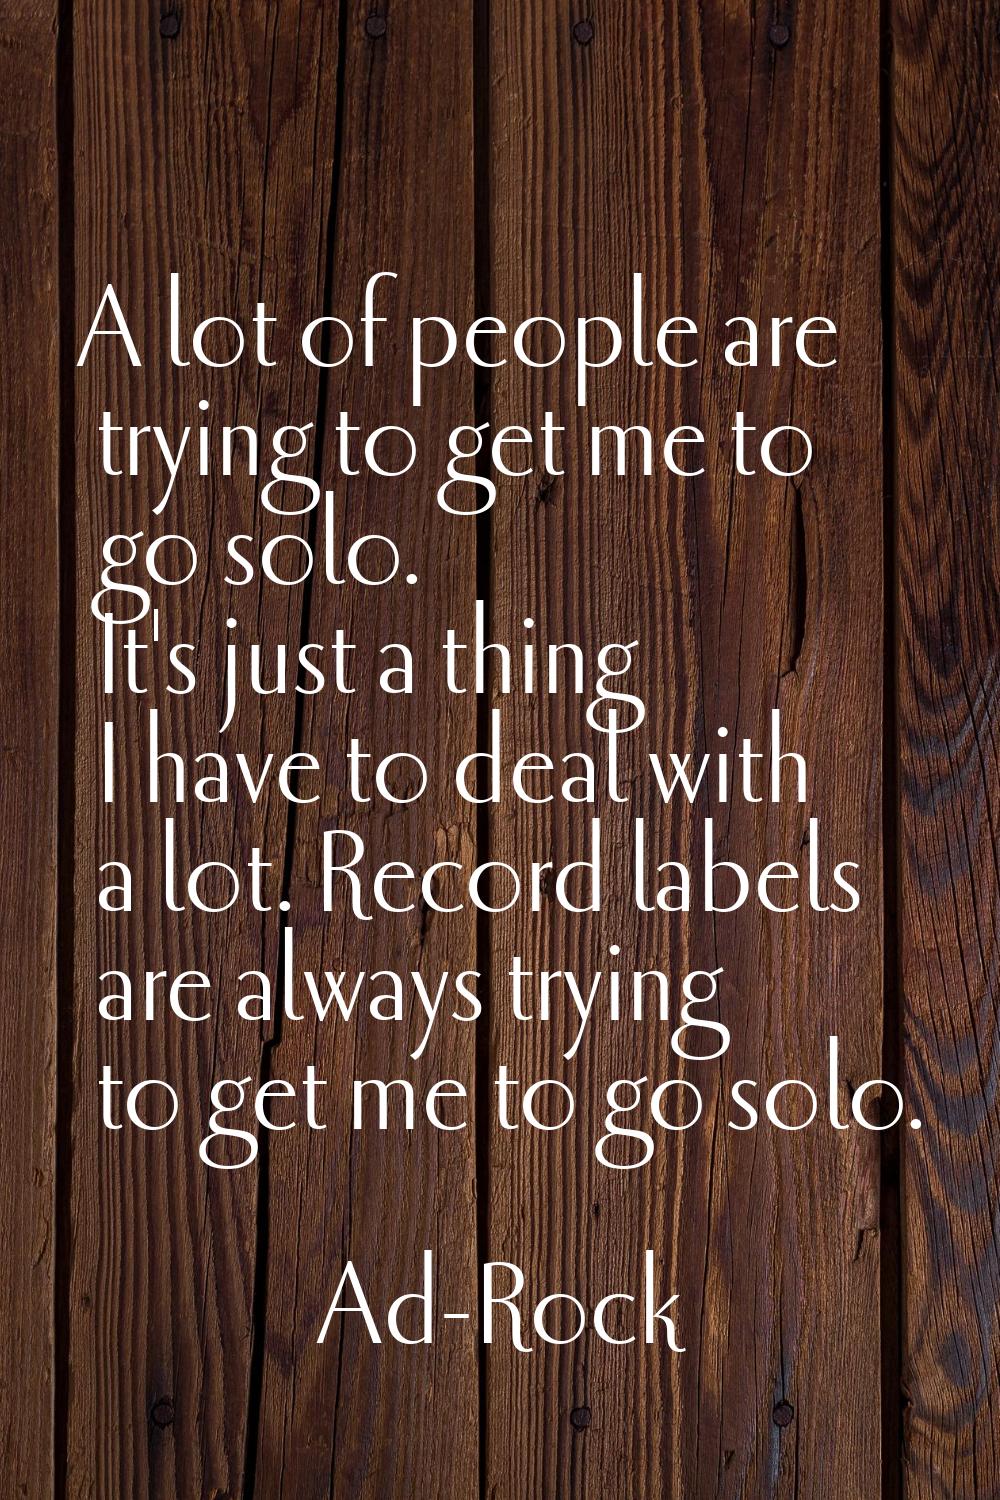 A lot of people are trying to get me to go solo. It's just a thing I have to deal with a lot. Recor